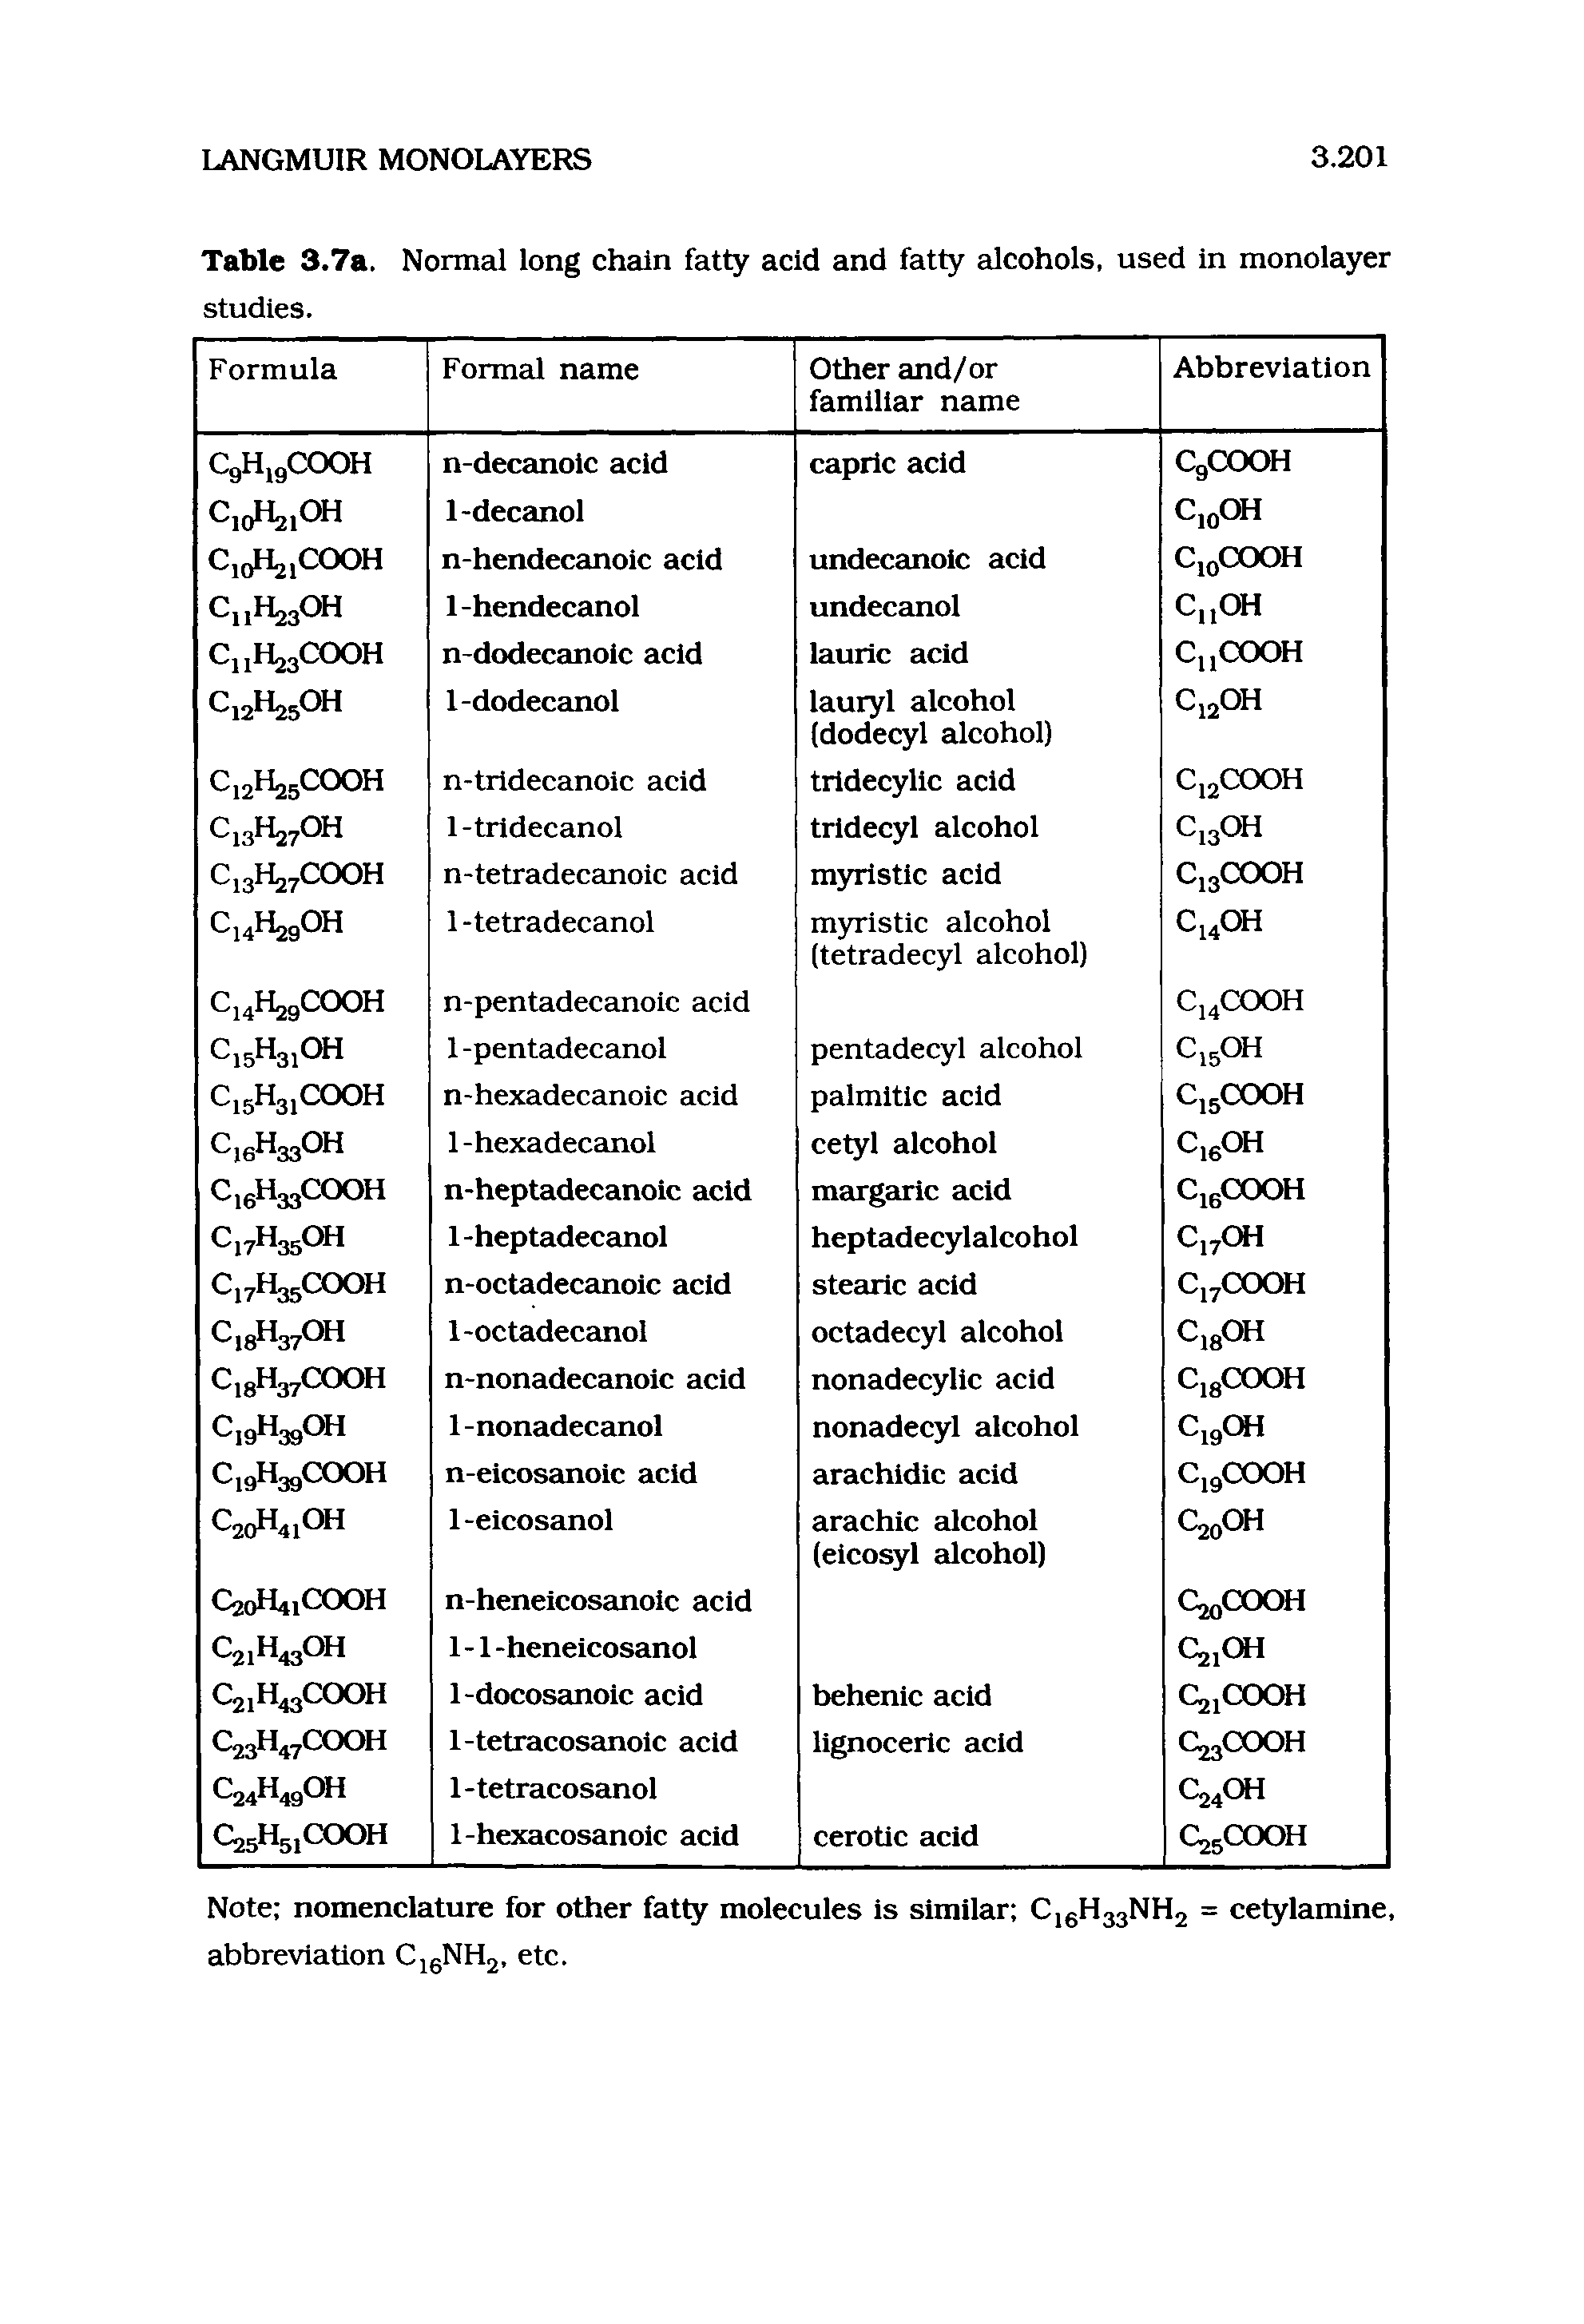 Table 3.7a. Normal long chain fatty acid and fatty alcohols, used in monolayer studies.